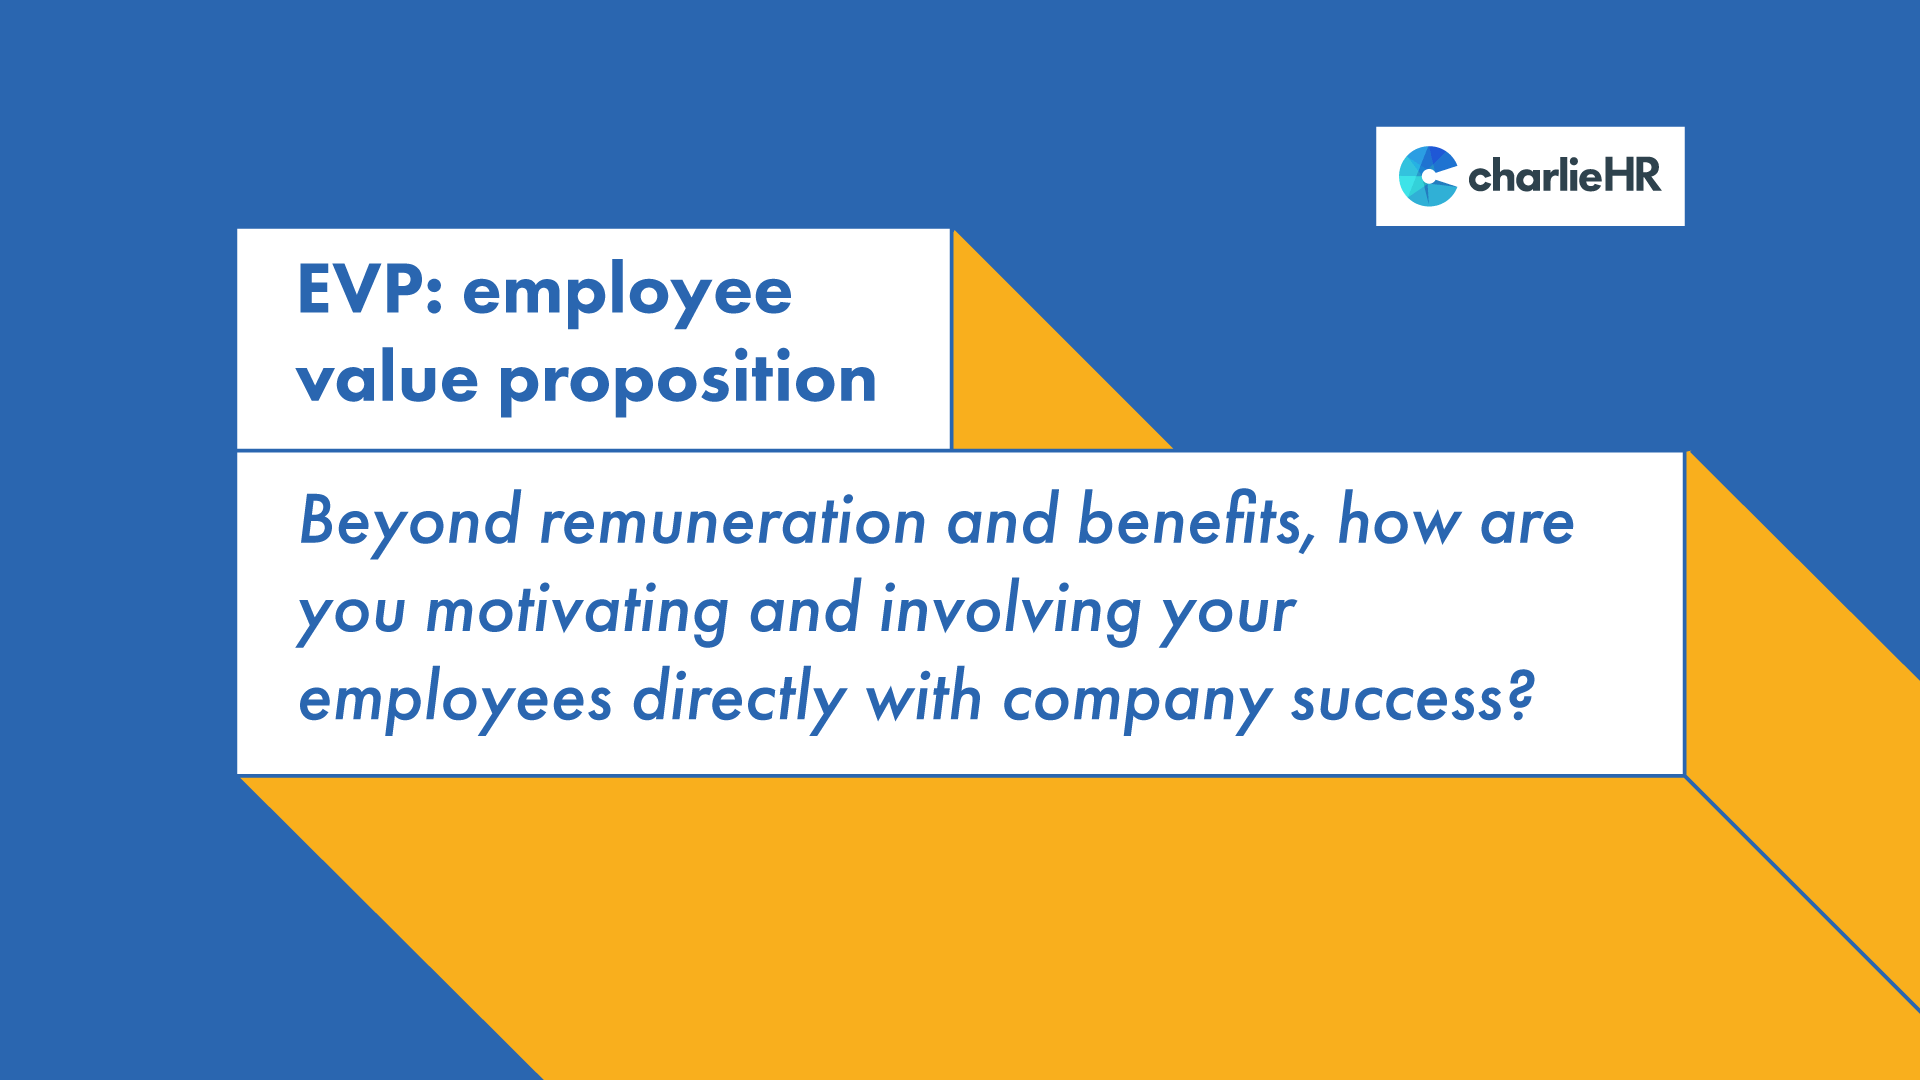 Employee Value Proposition - how are you motivation your employees beyond remuneration and benefits